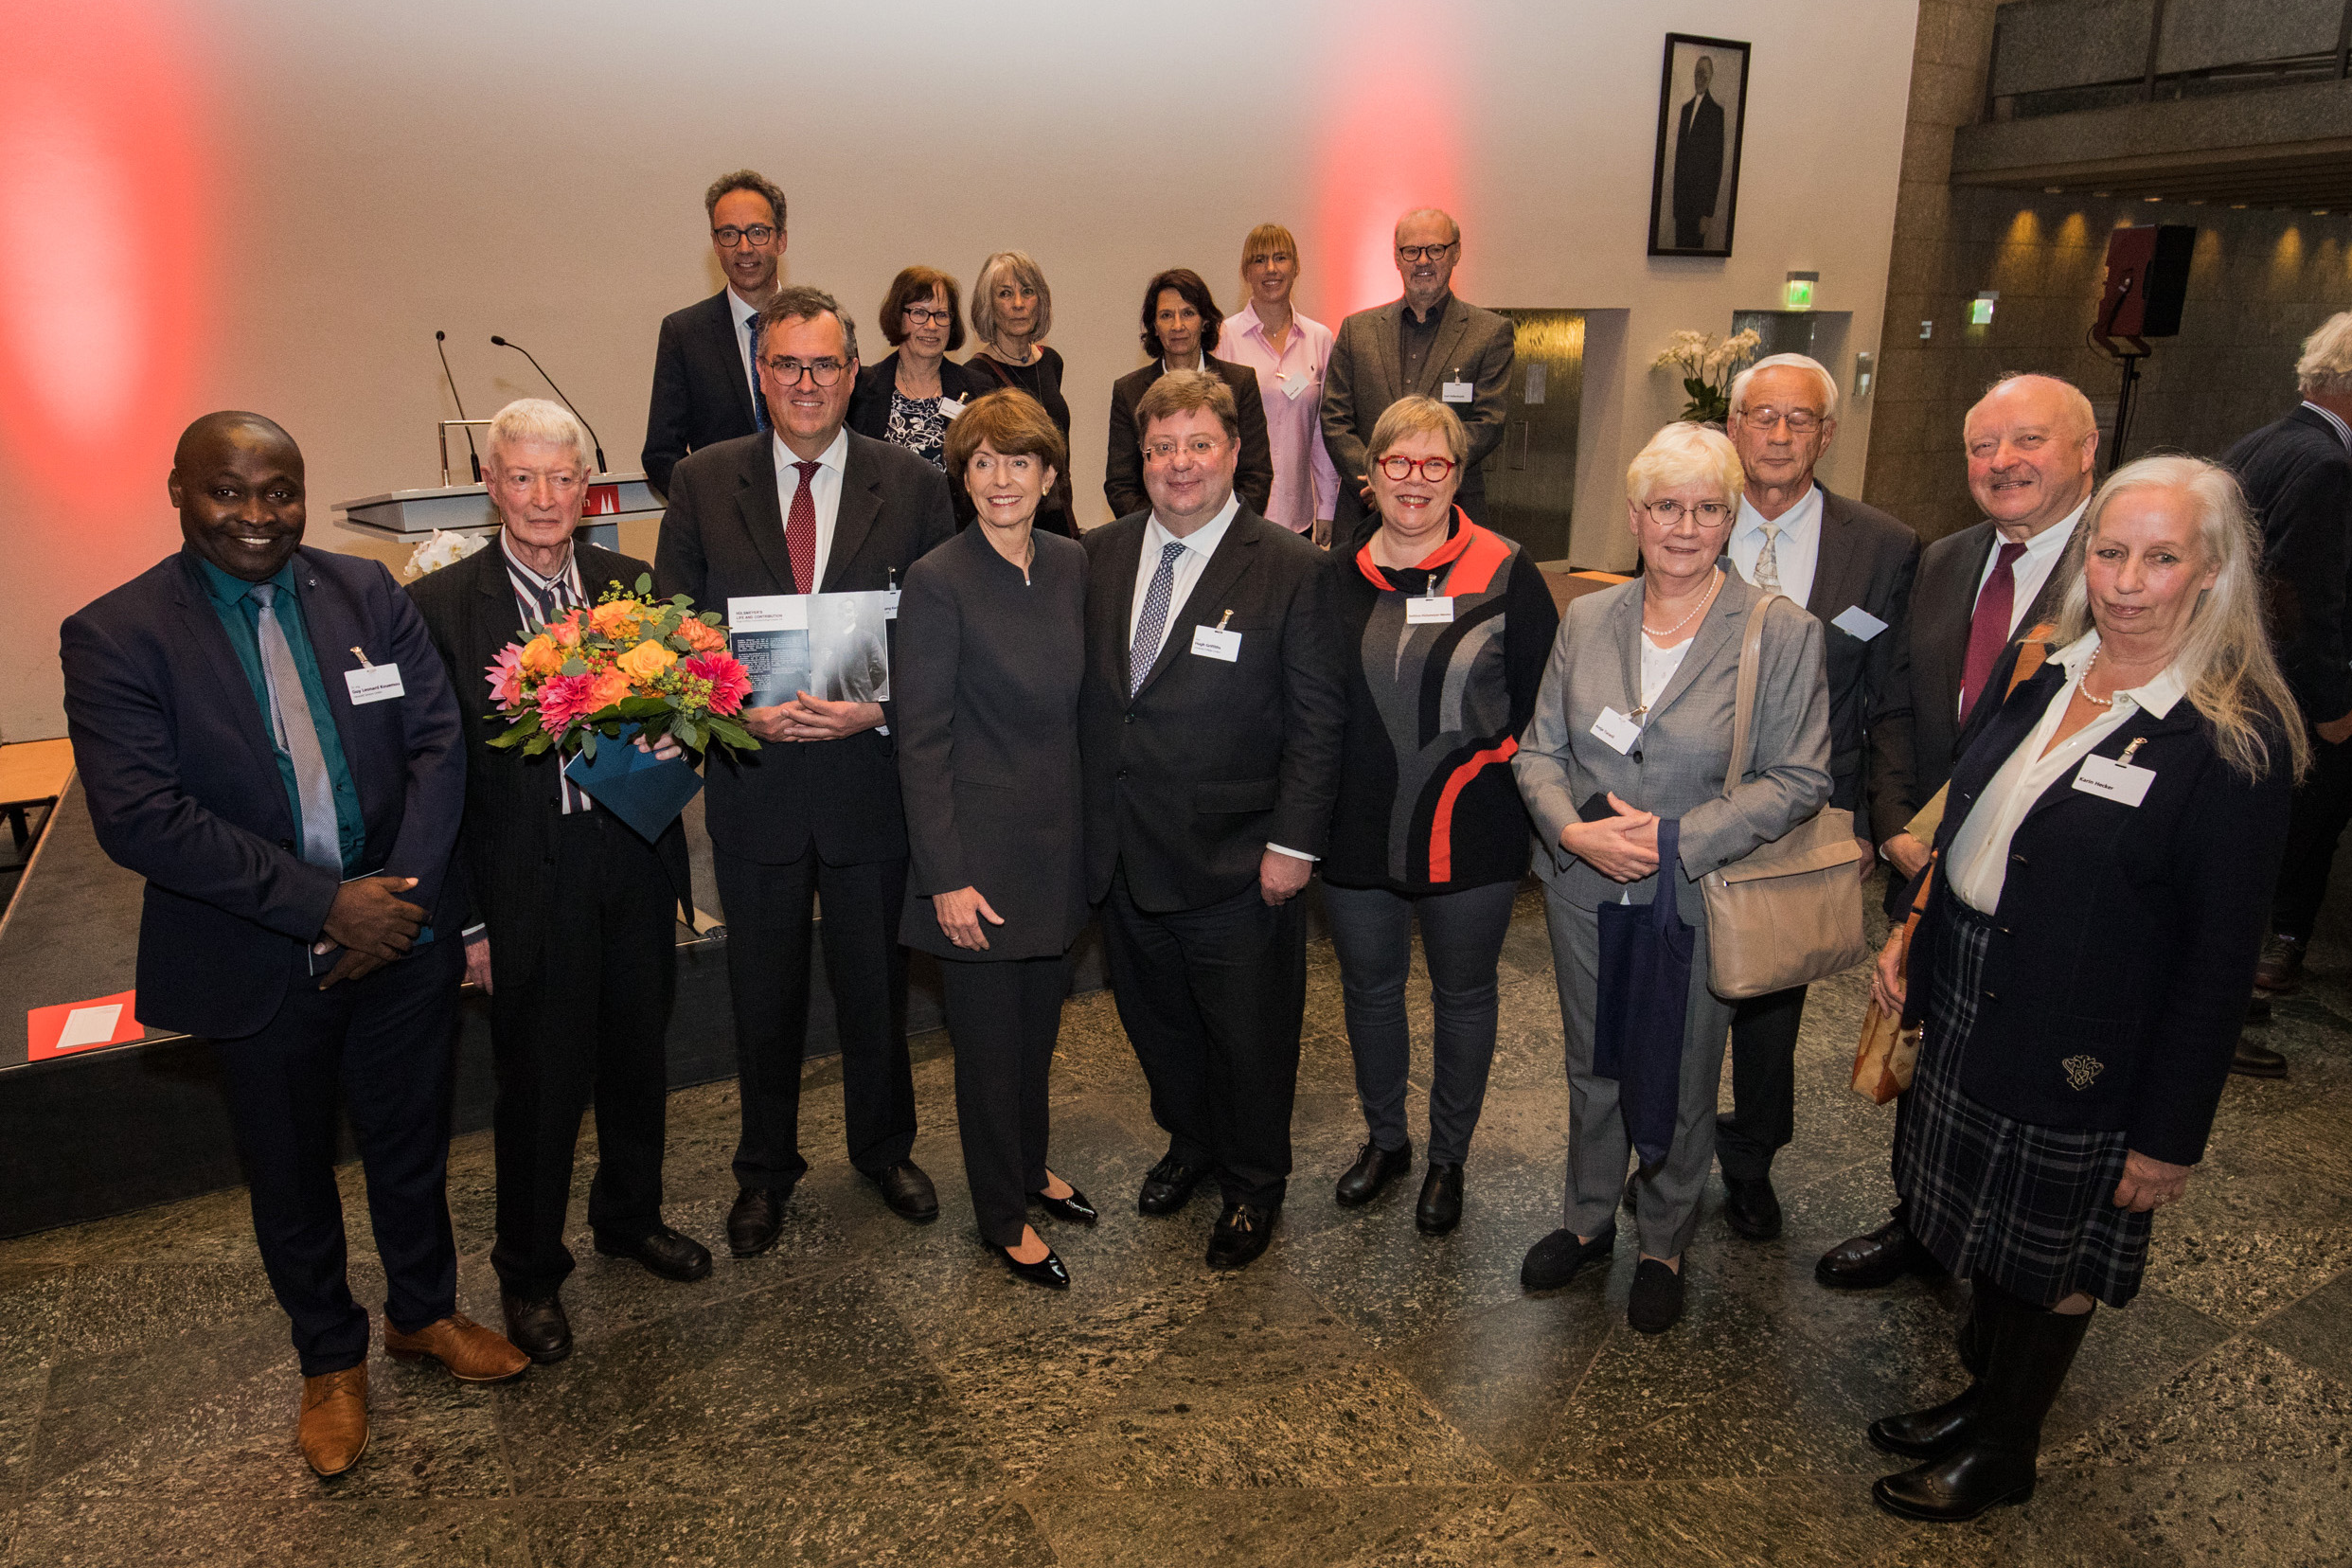 Ceremony in honour of Christian Hülsmeyer with Cologne's Lord Mayor Henriette Reker (centre), radar experts from all over the world and Hülsmeyer's grandchildren.